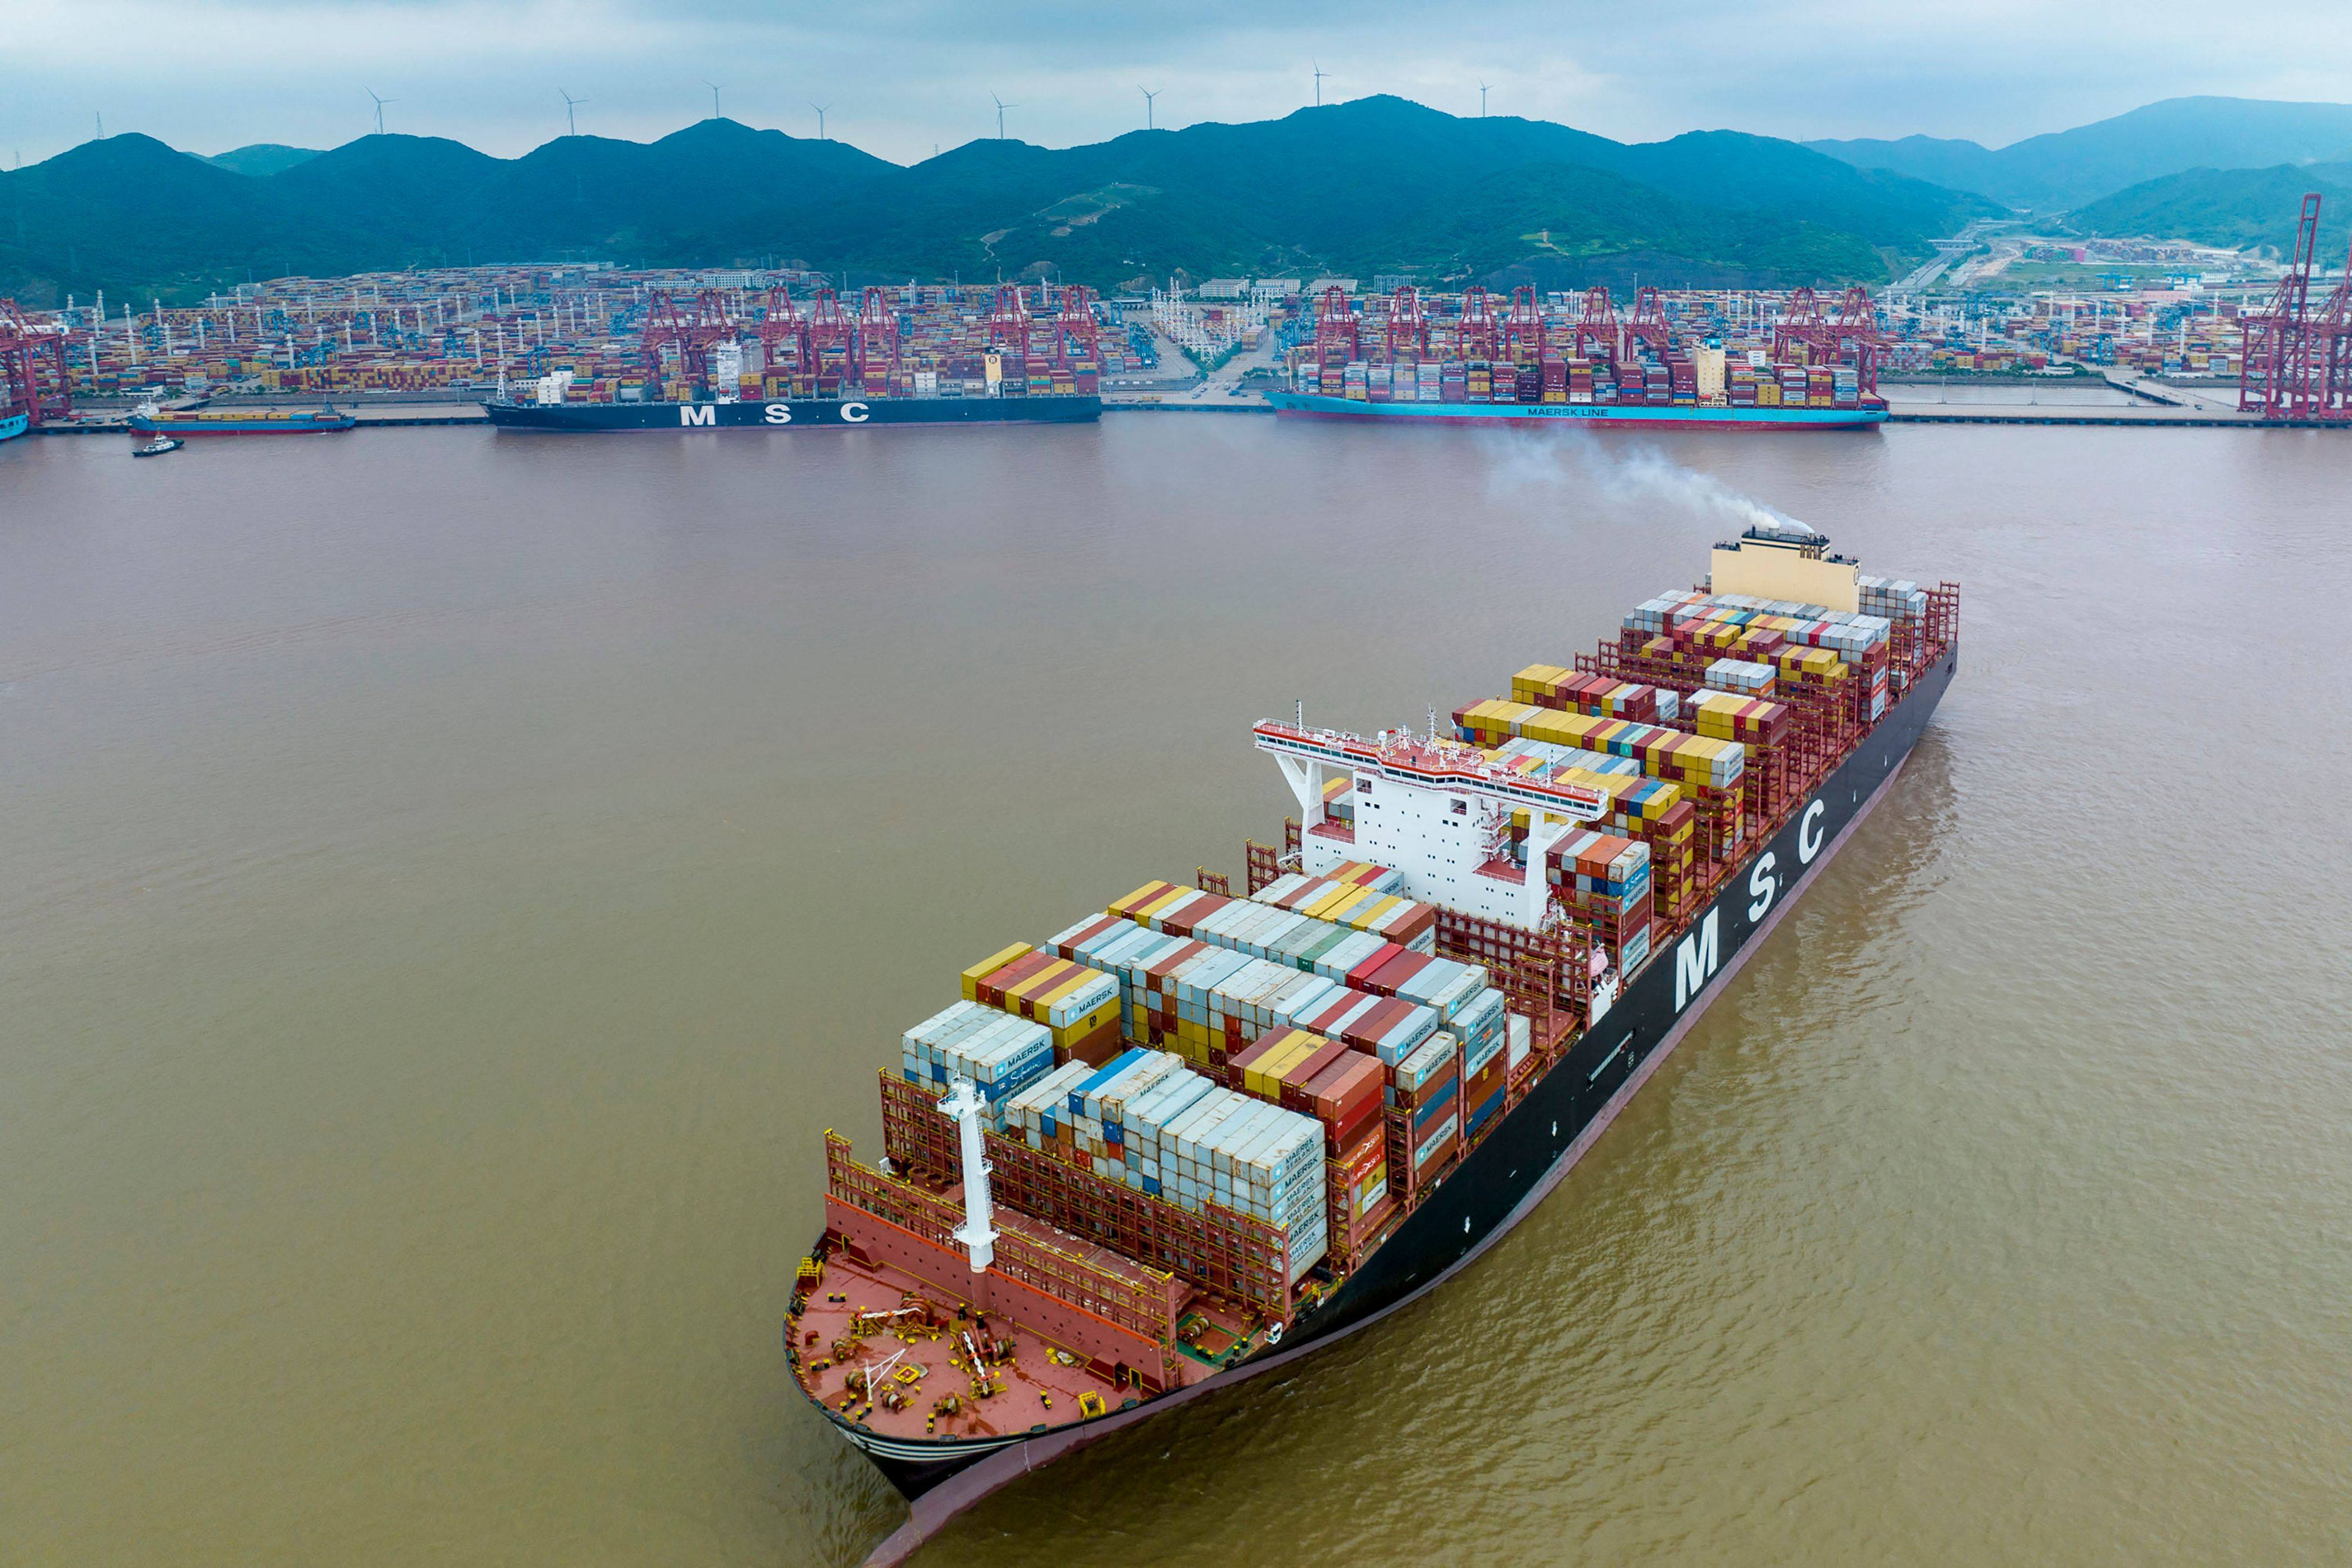 A cargo ship leaves Zhoushan port in Ningbo, in China’s eastern Zhejiang province, in this photo taken on June 6. Ocean-going vessels contributing around 3 per cent of global greenhouse gas emissions annually, according to the United Nations Conference on Trade and Development. Photo: AFP